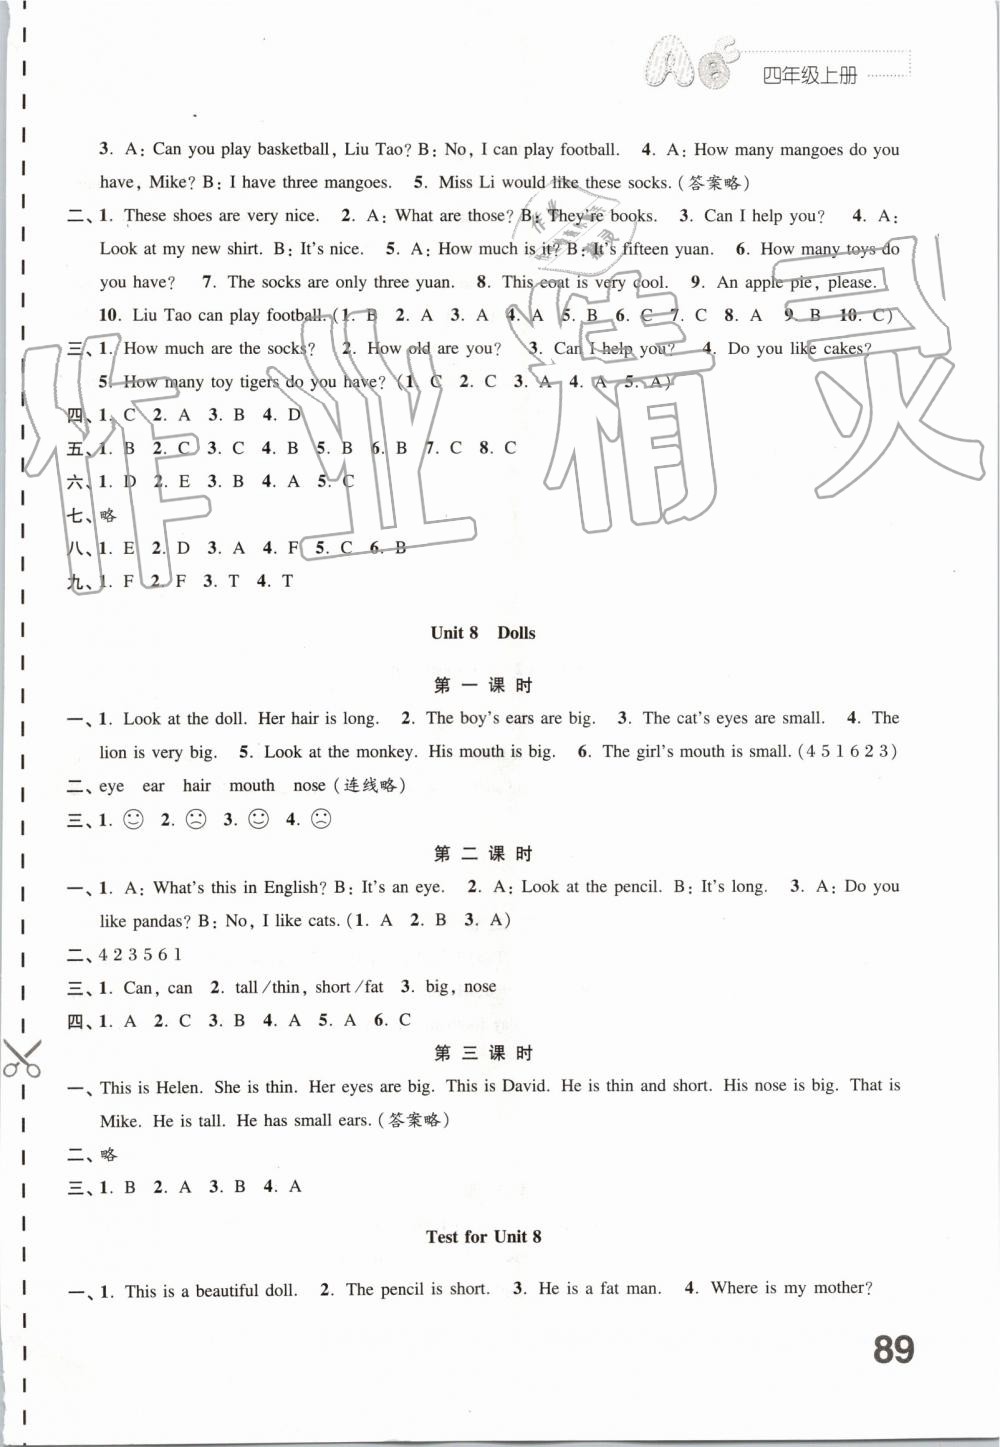 Test for Unit 8 - 第9页